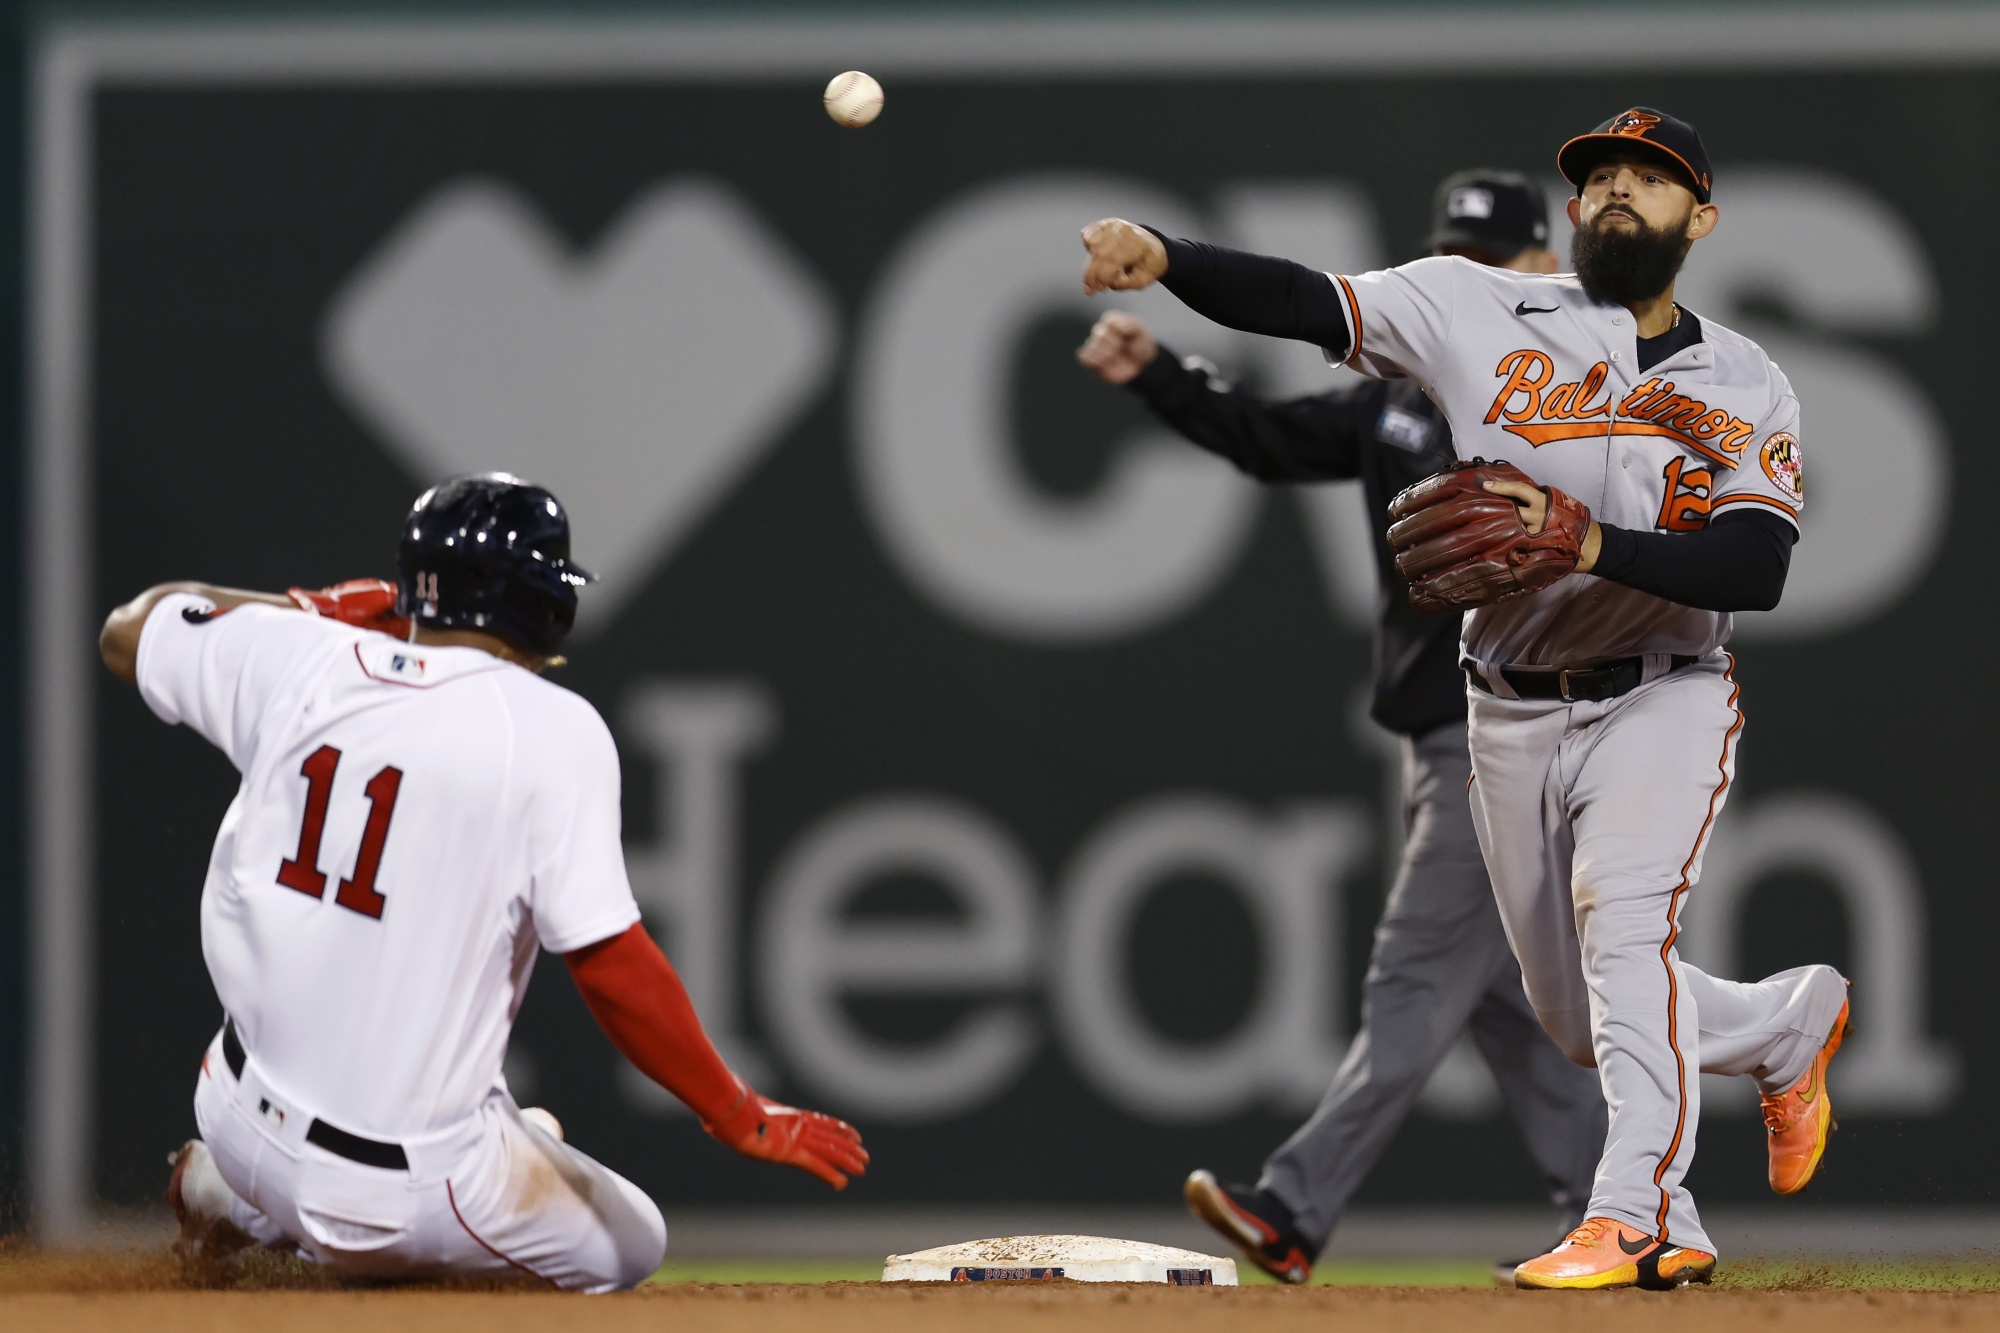 Orioles Waste 4 Homers in 13-9 Loss to Slumping Red Sox - Bloomberg